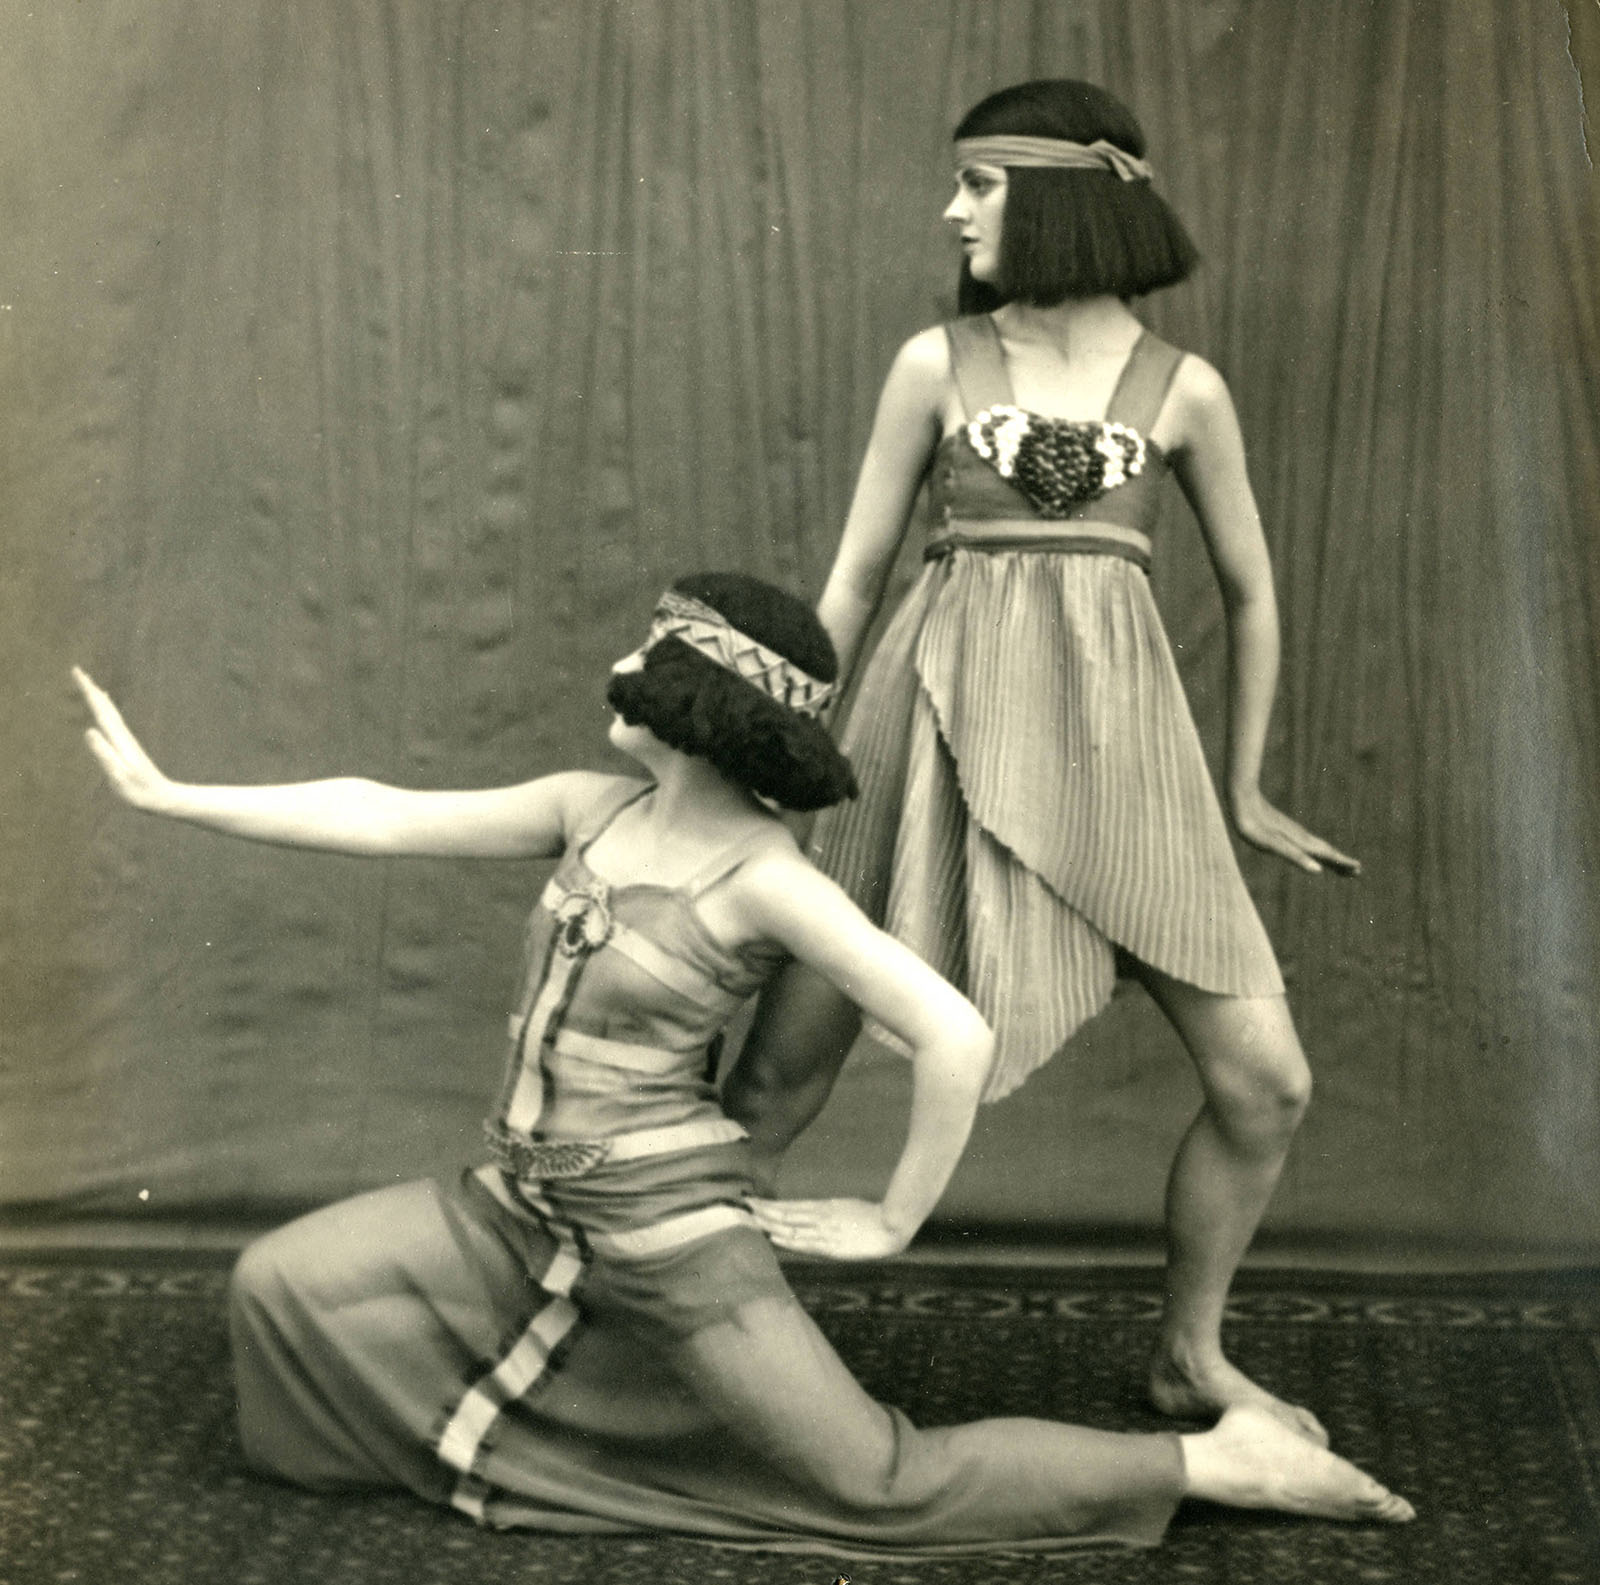 Putnam & Valentine ~ Denishawn Dancers, 1918. University of Washington: Special Collections / J. Willis Sayre Collection of Theatrical Photographs (SAYRE id. 10947)